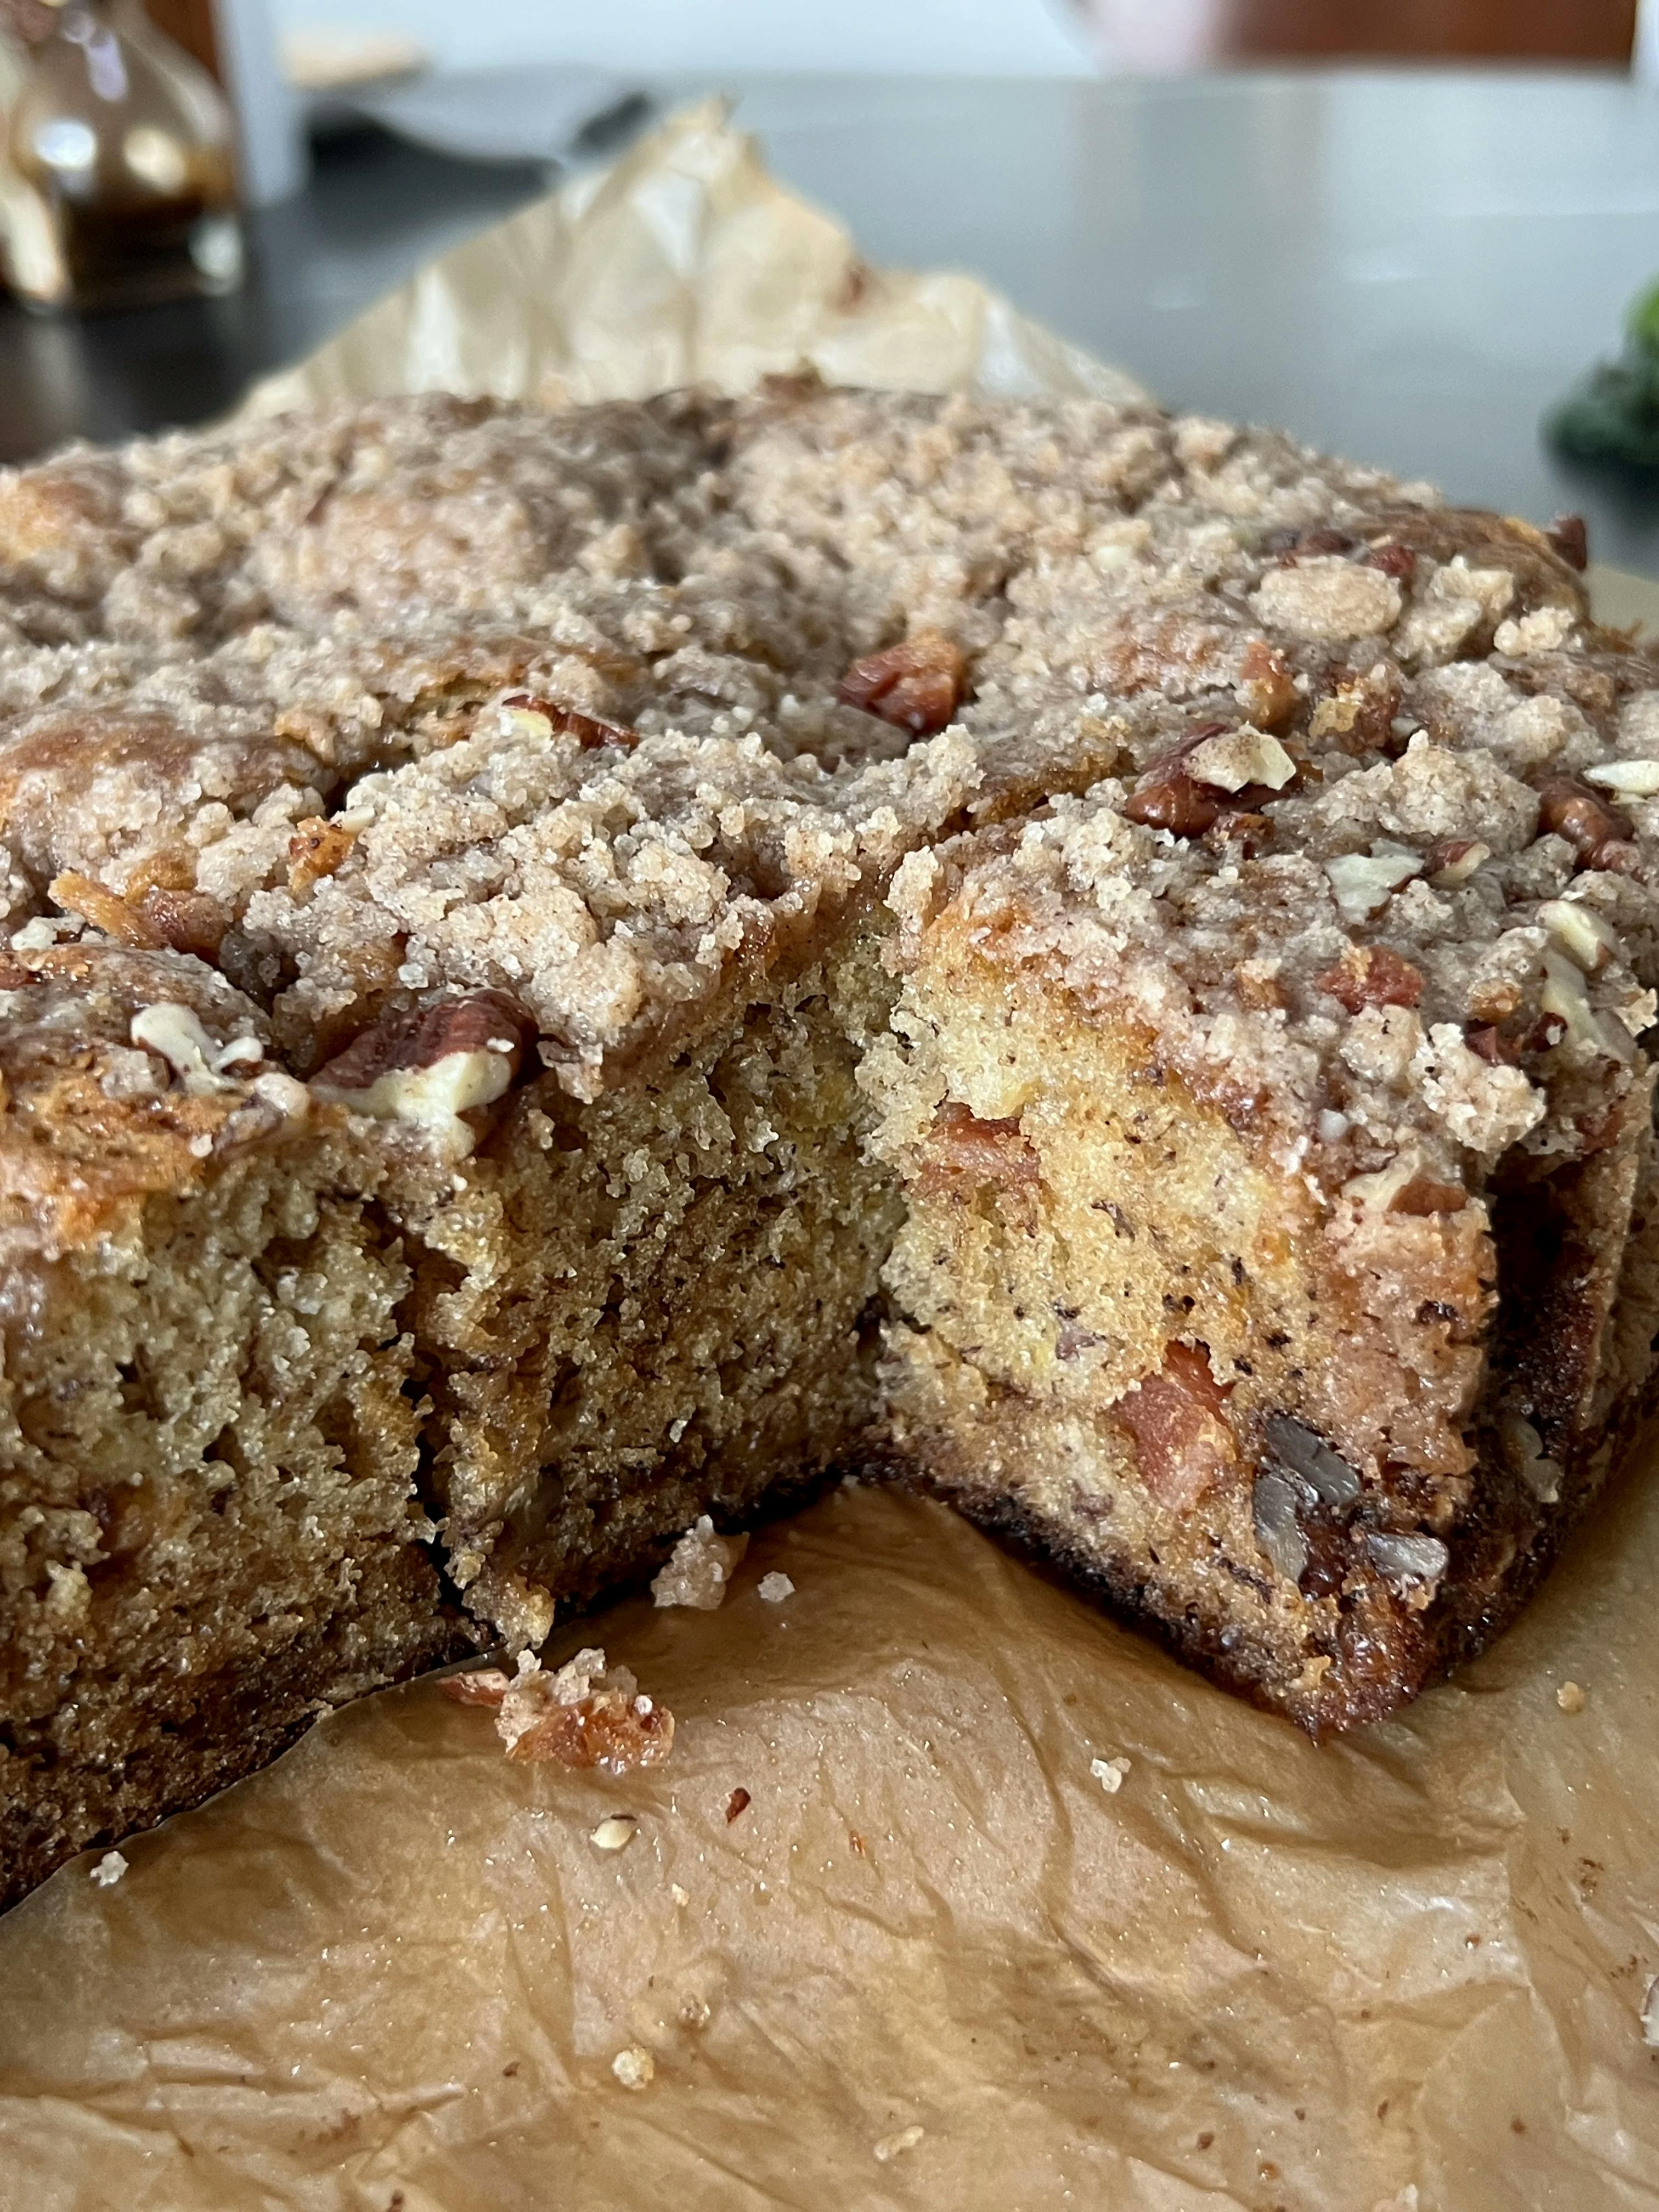 Picture for Banana Coffee Cake (Still Testing)